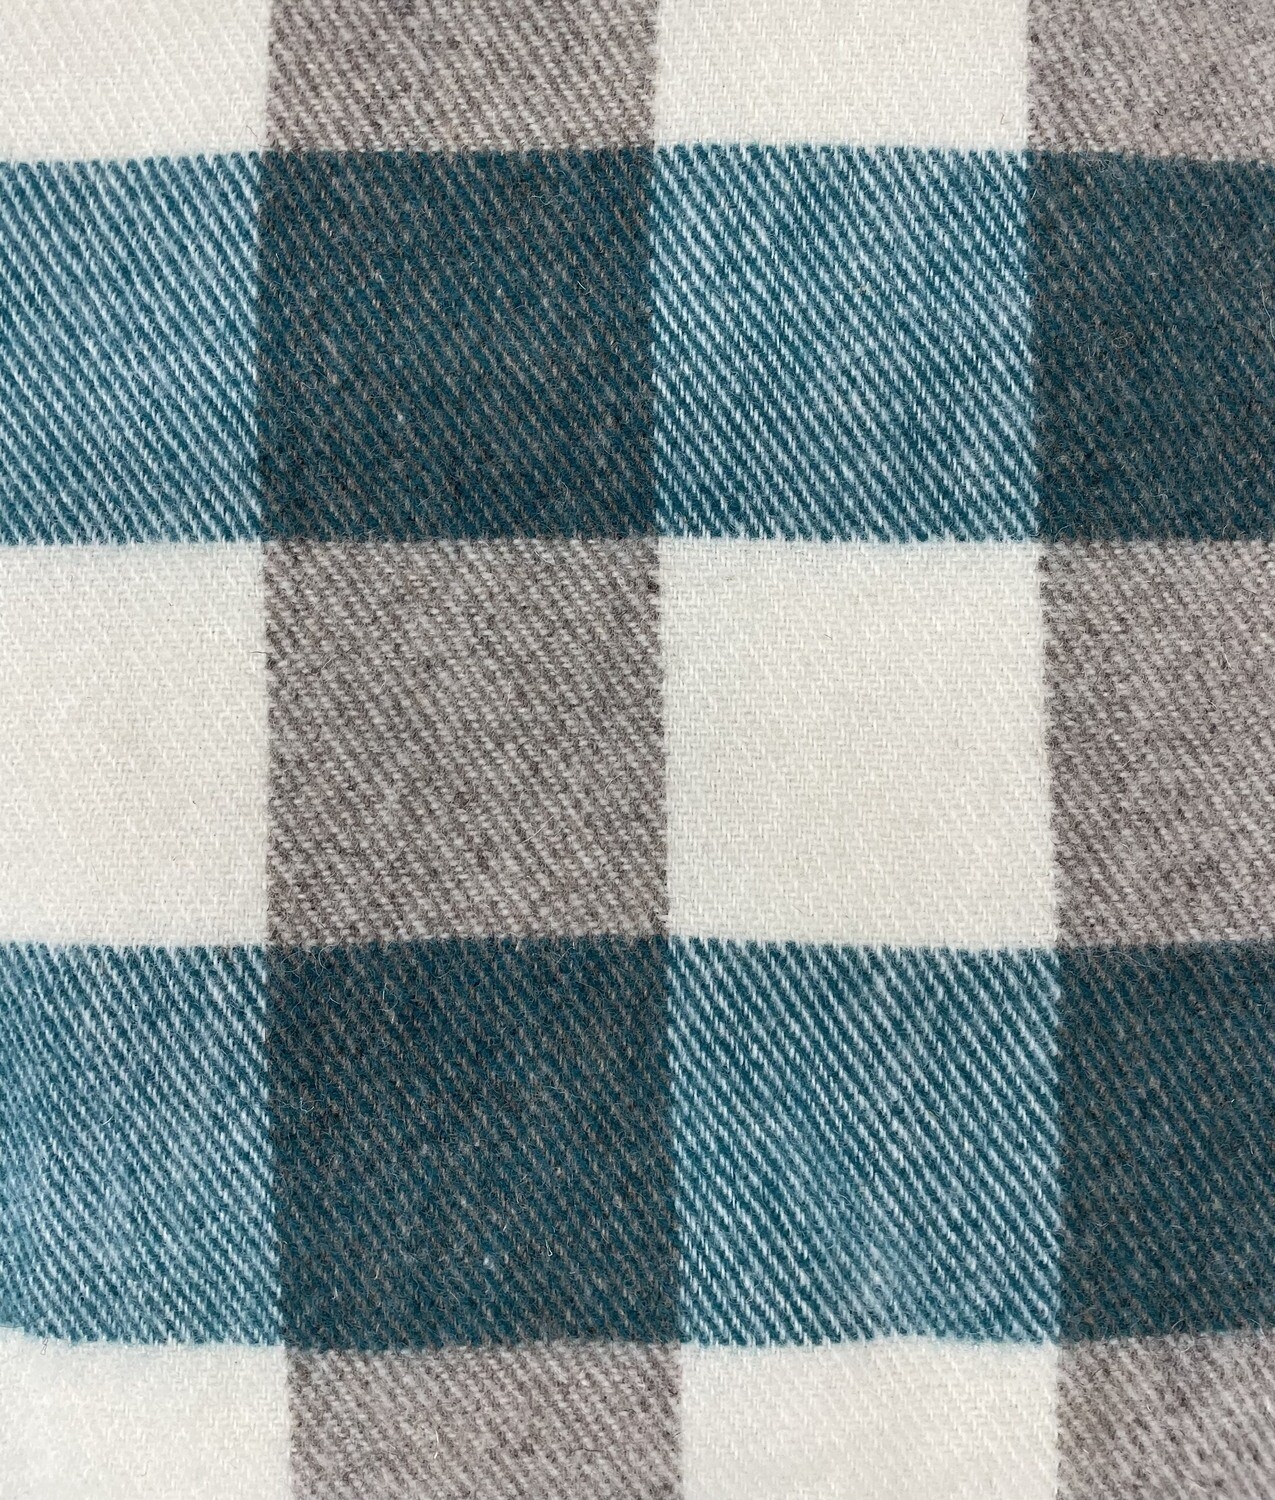 Teal with Natural White MacAusland Throw Blanket